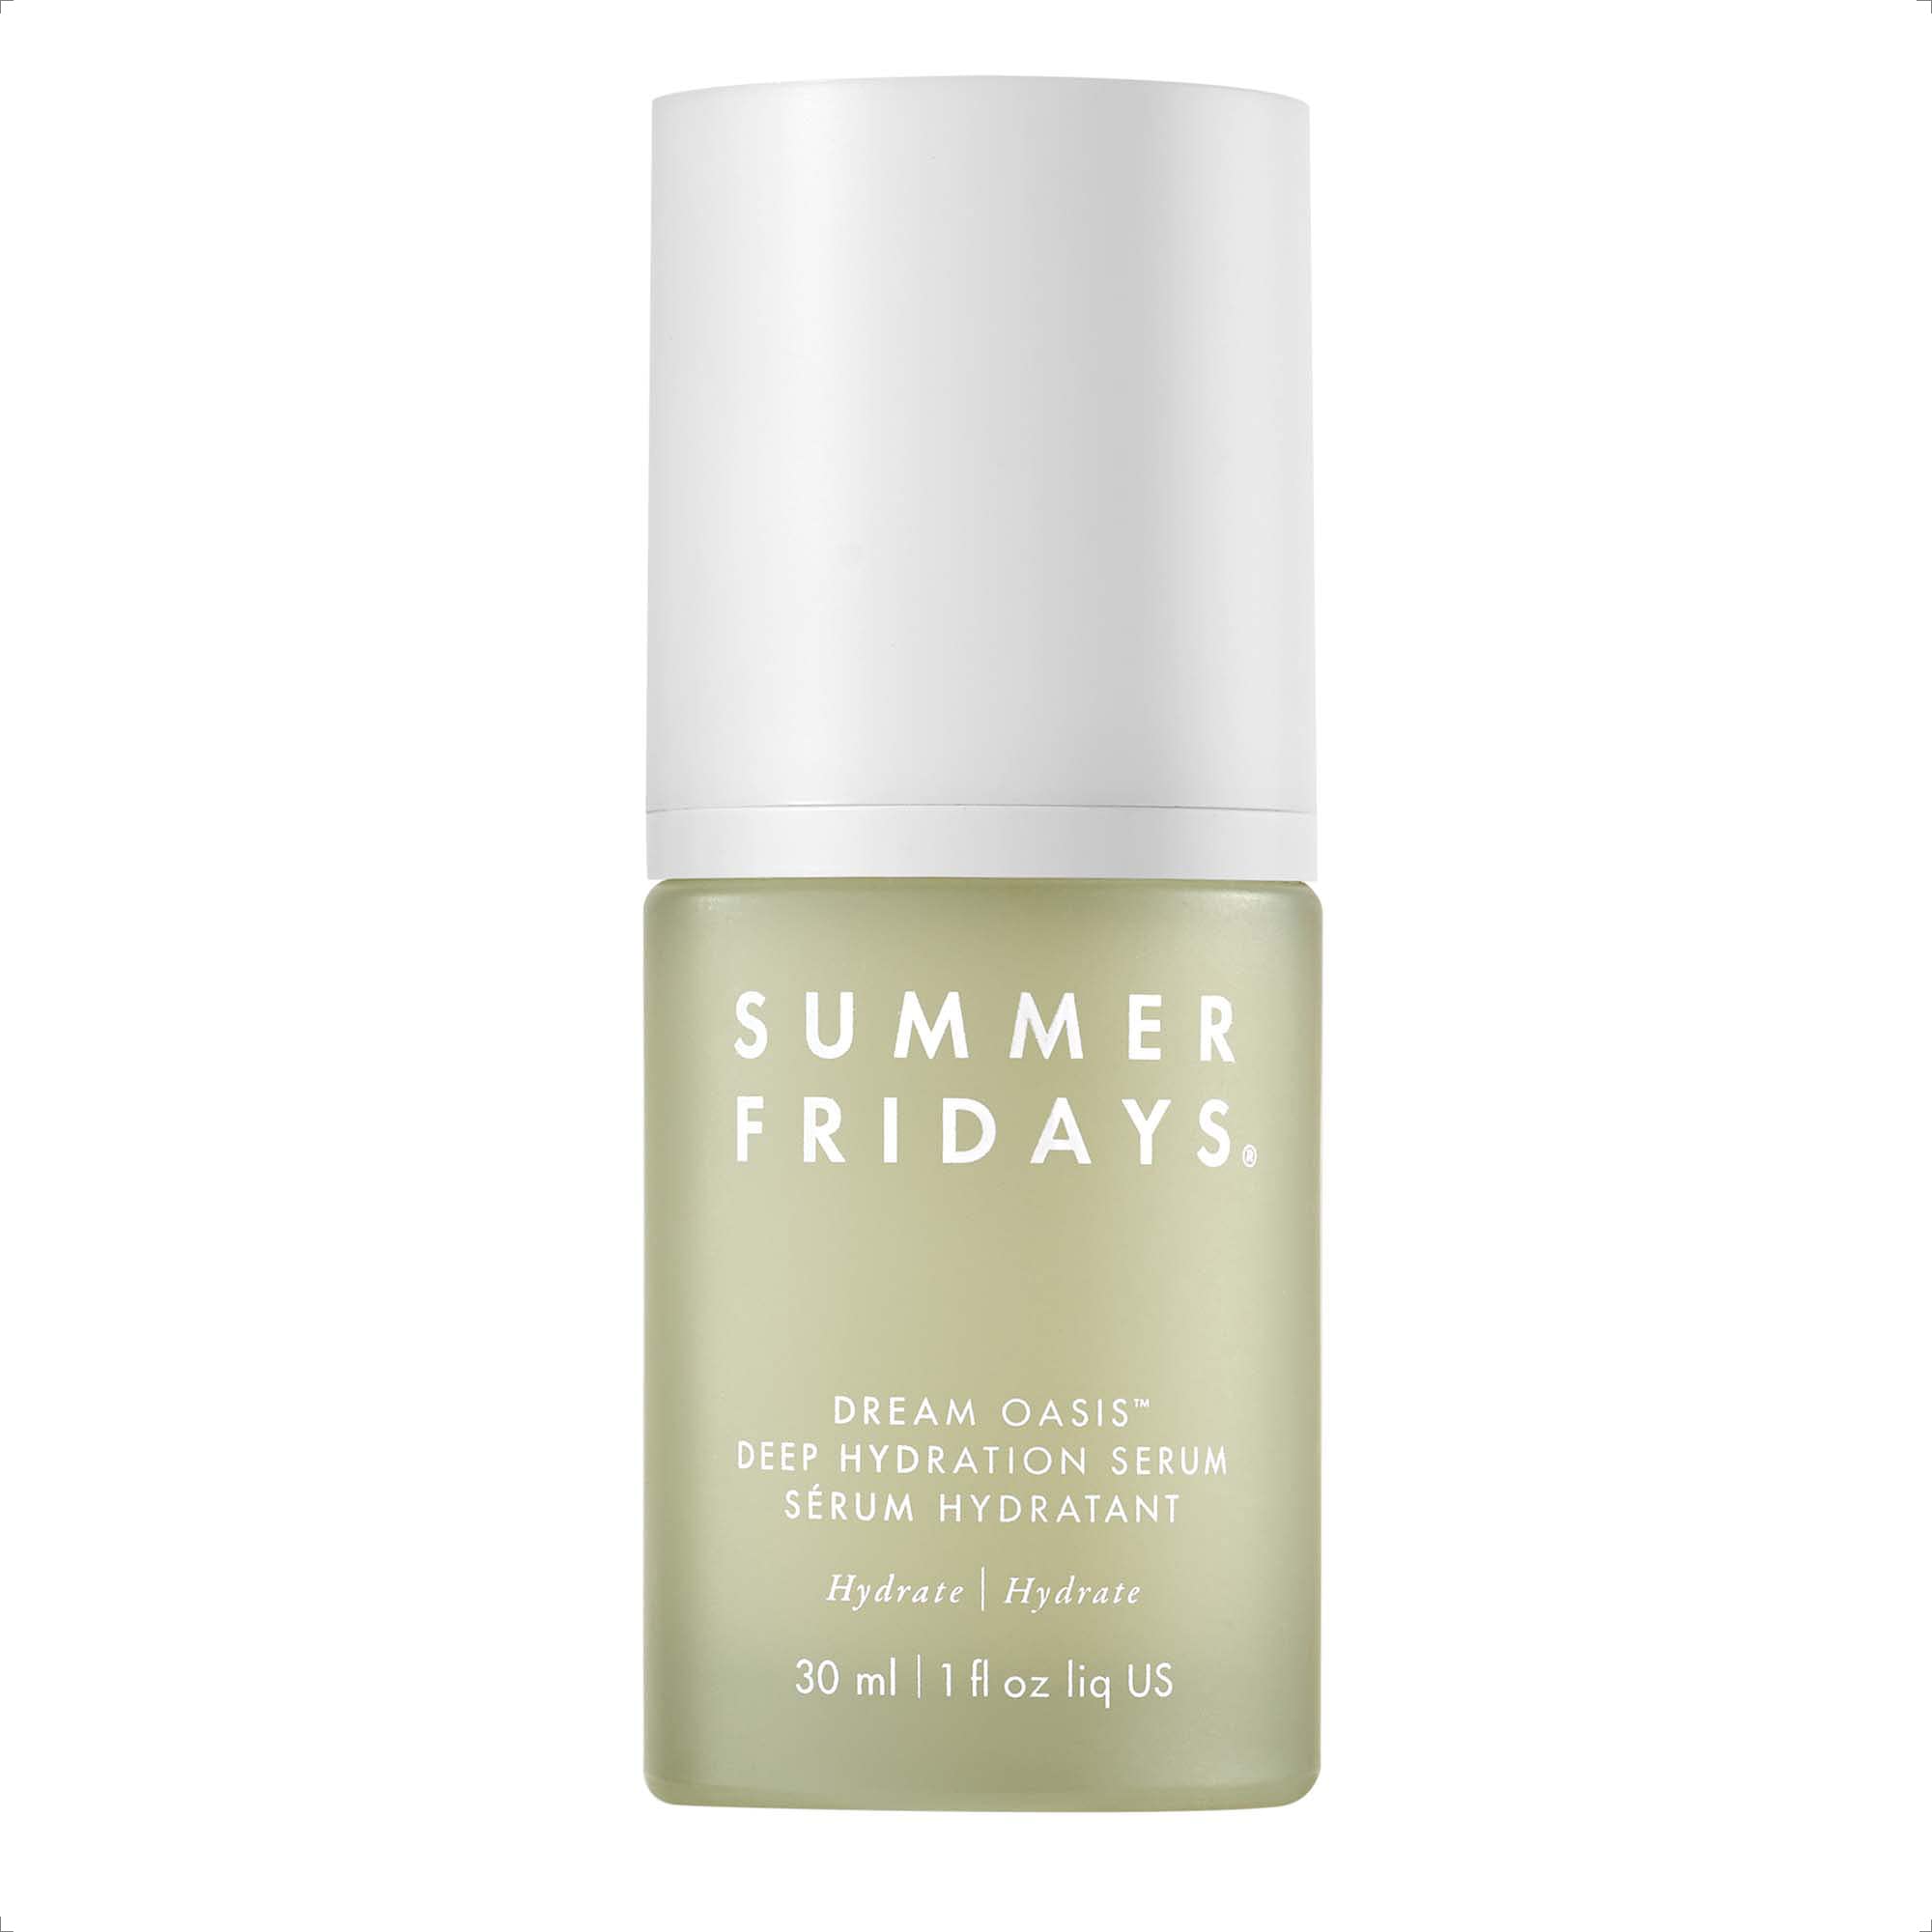 Summer Fridays Dream Oasis Deep Hydration Serum, Calming, Hydrating, and Soothing Face Serum (1 Fl Oz)